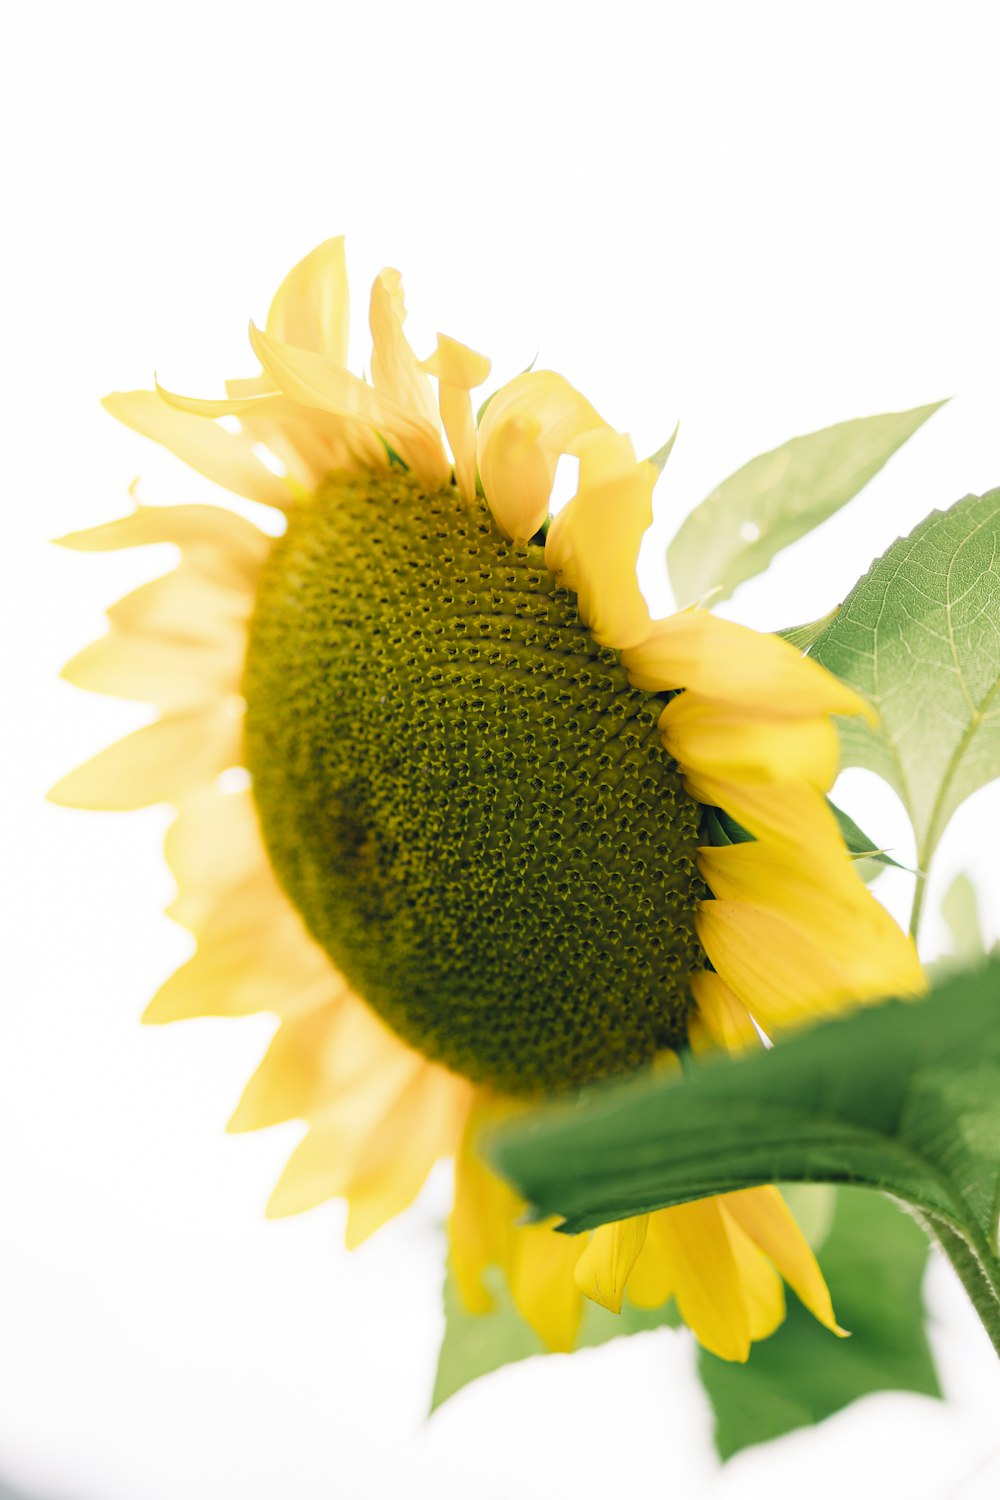 a large sunflower with green leaves on a white background